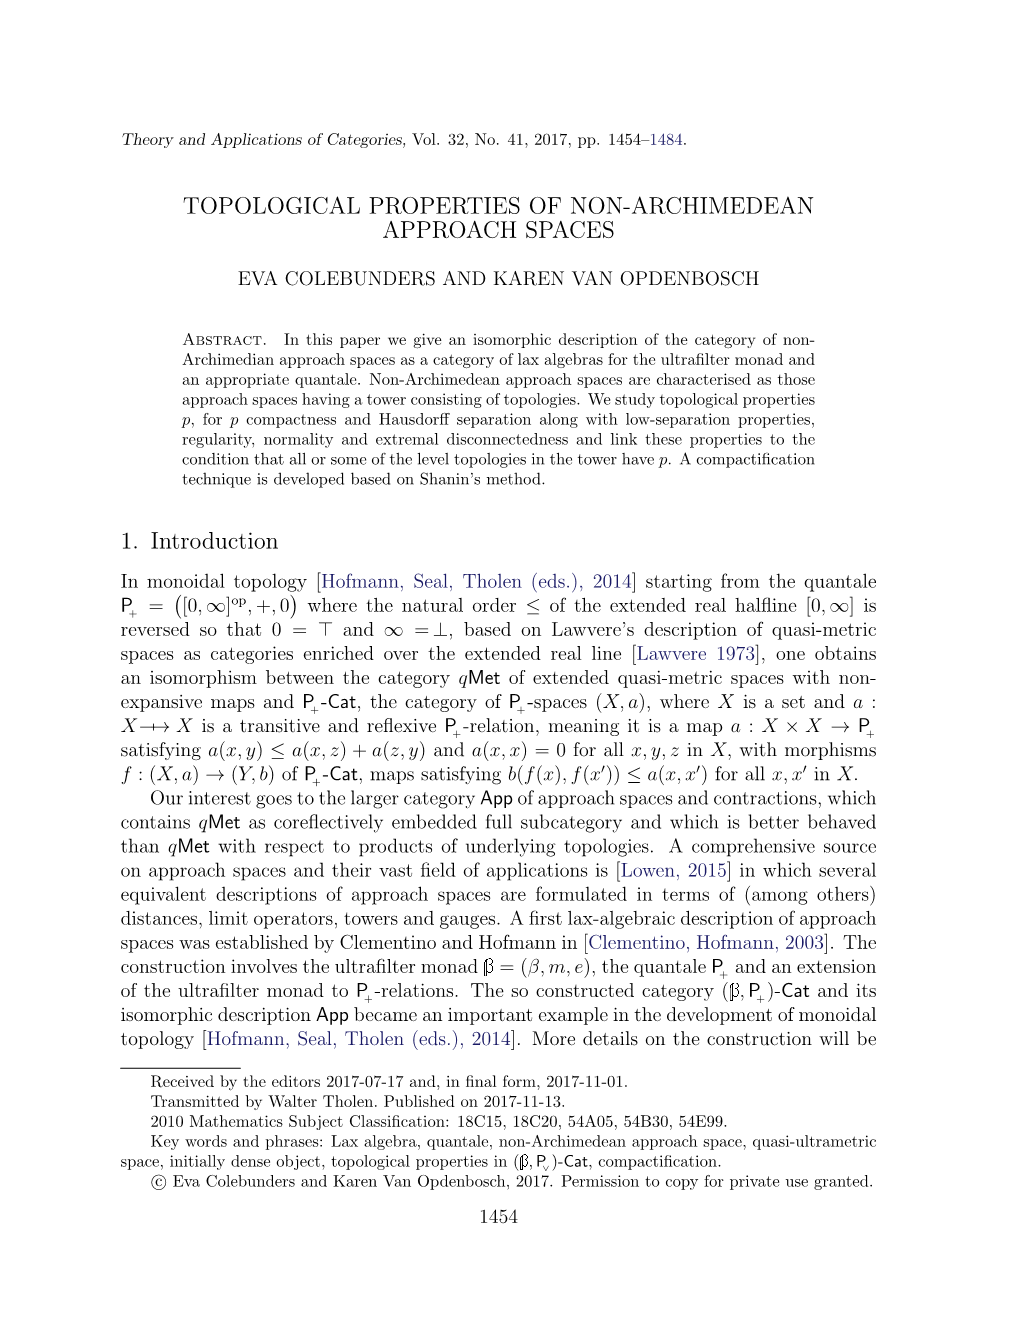 TOPOLOGICAL PROPERTIES of NON-ARCHIMEDEAN APPROACH SPACES 1. Introduction